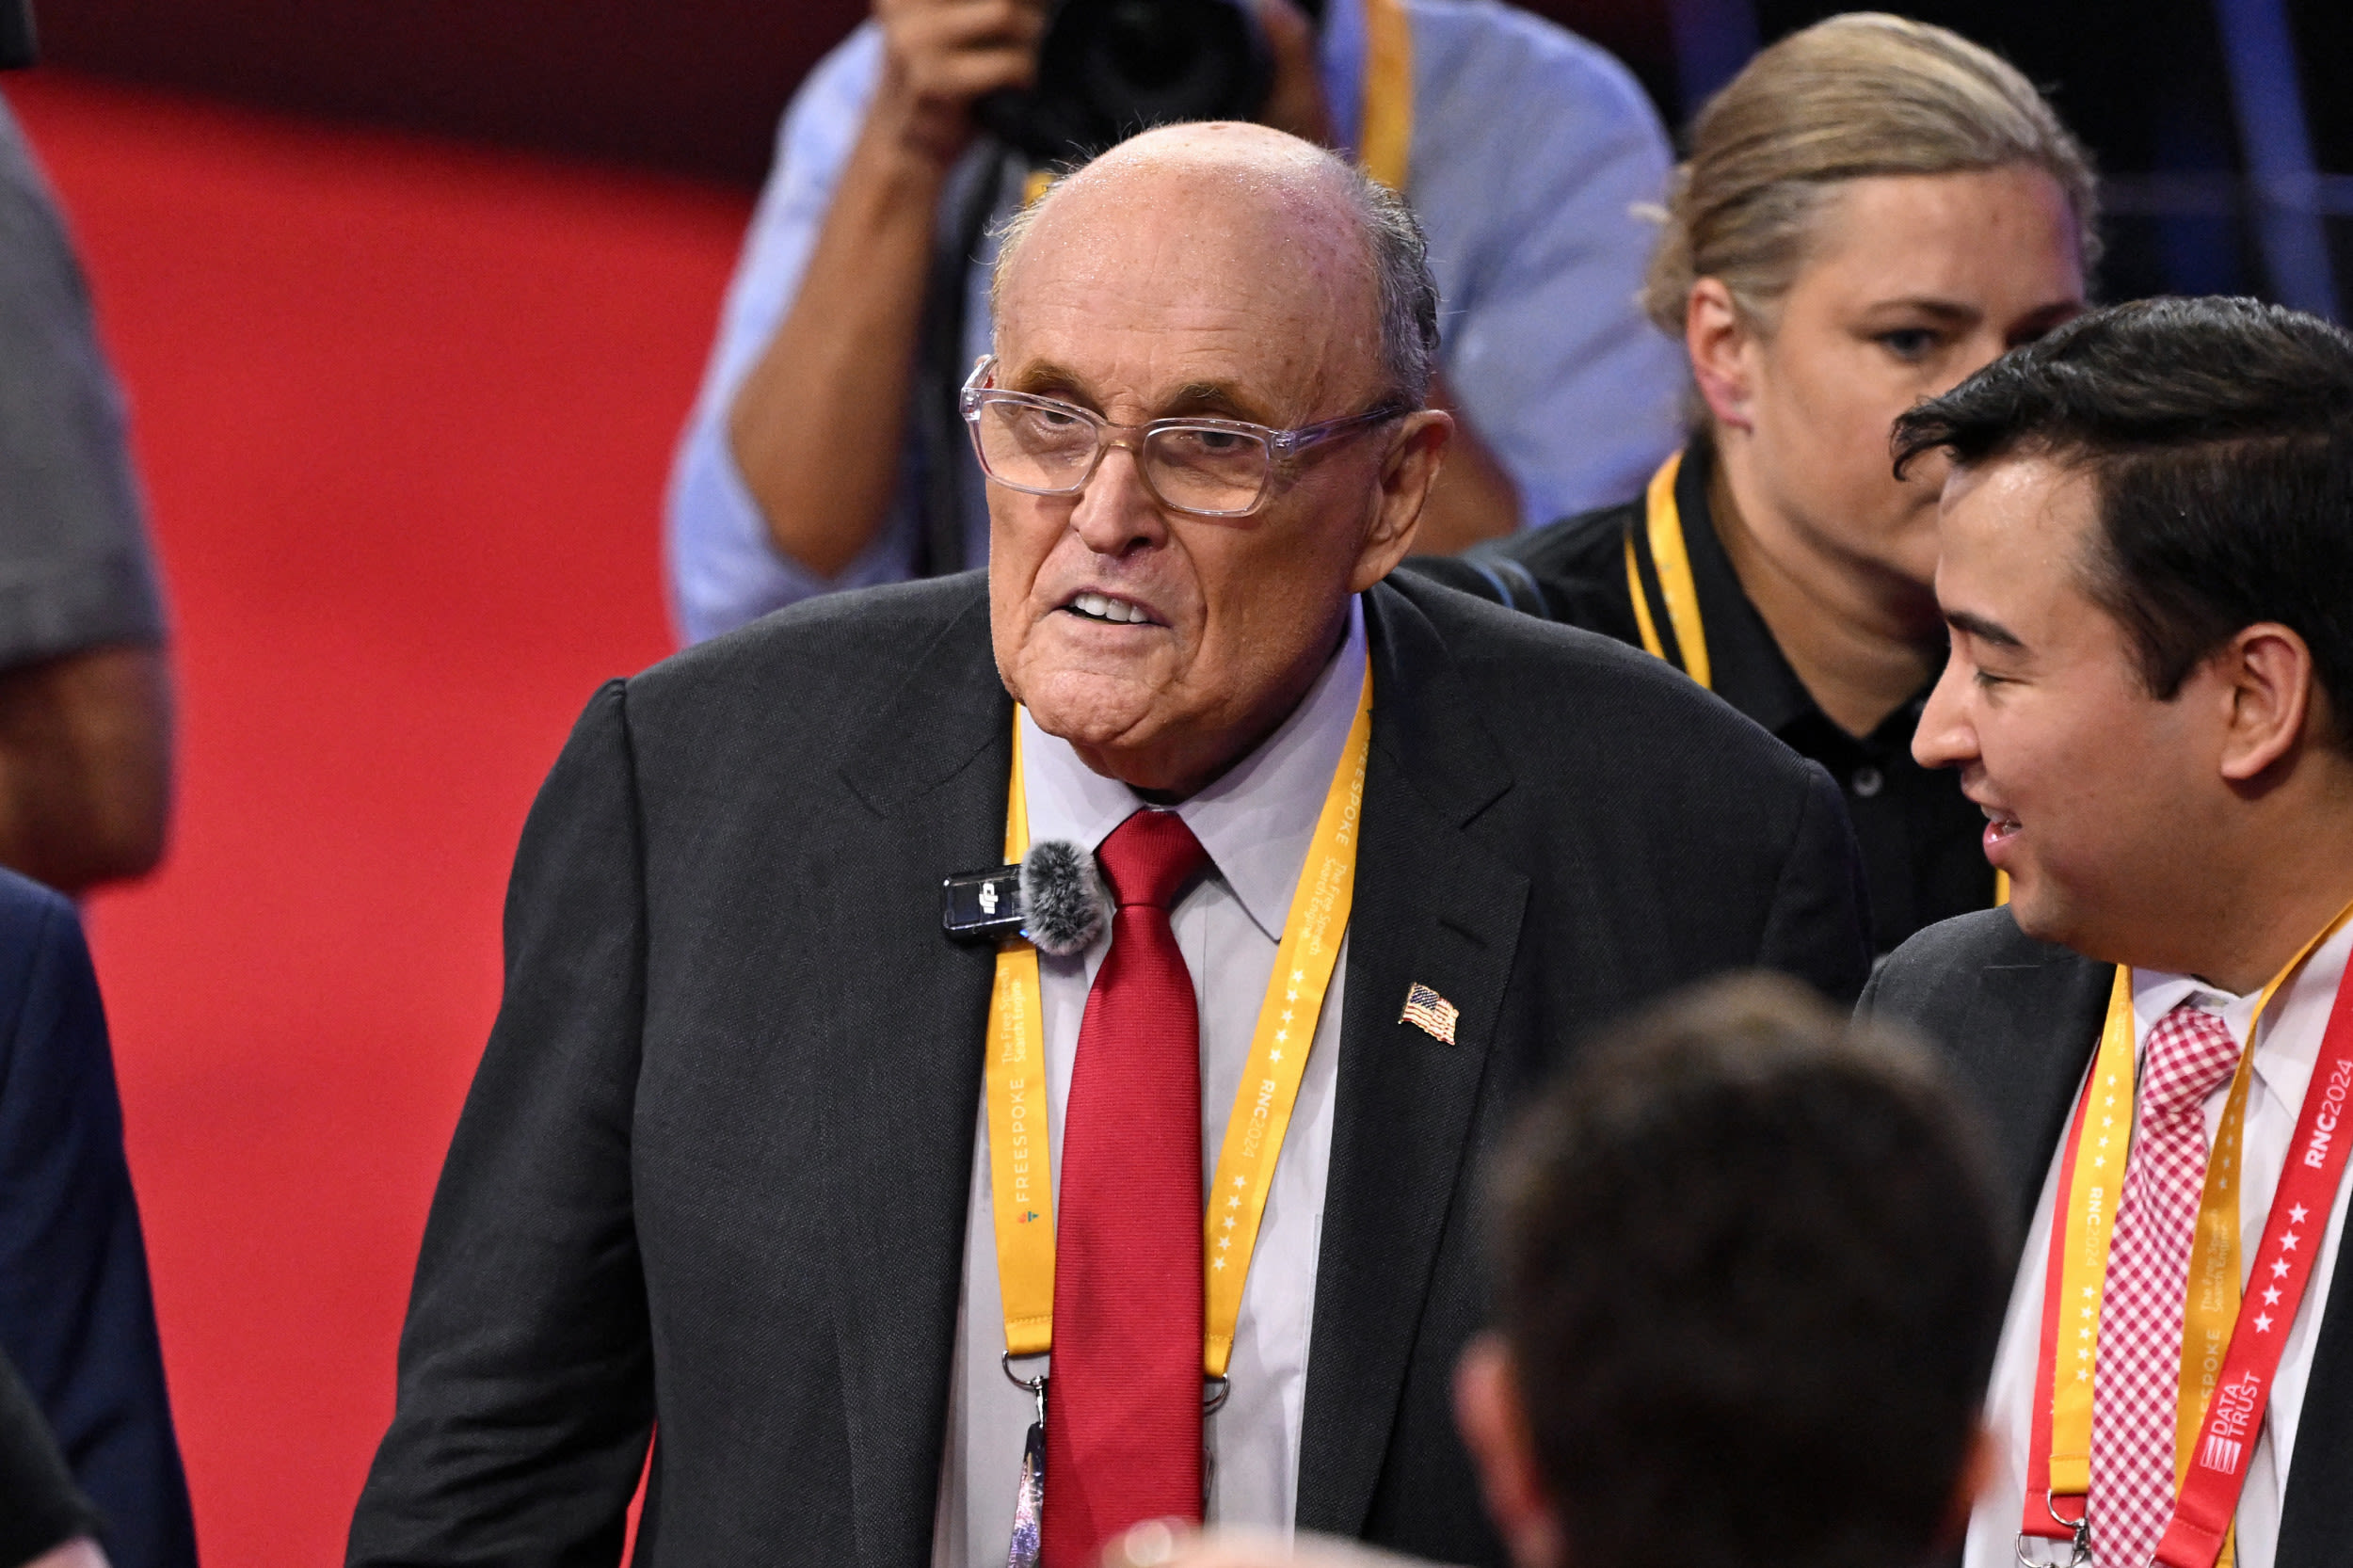 Rudy Giuliani seeks bankruptcy delay in $10M sexual harassment case